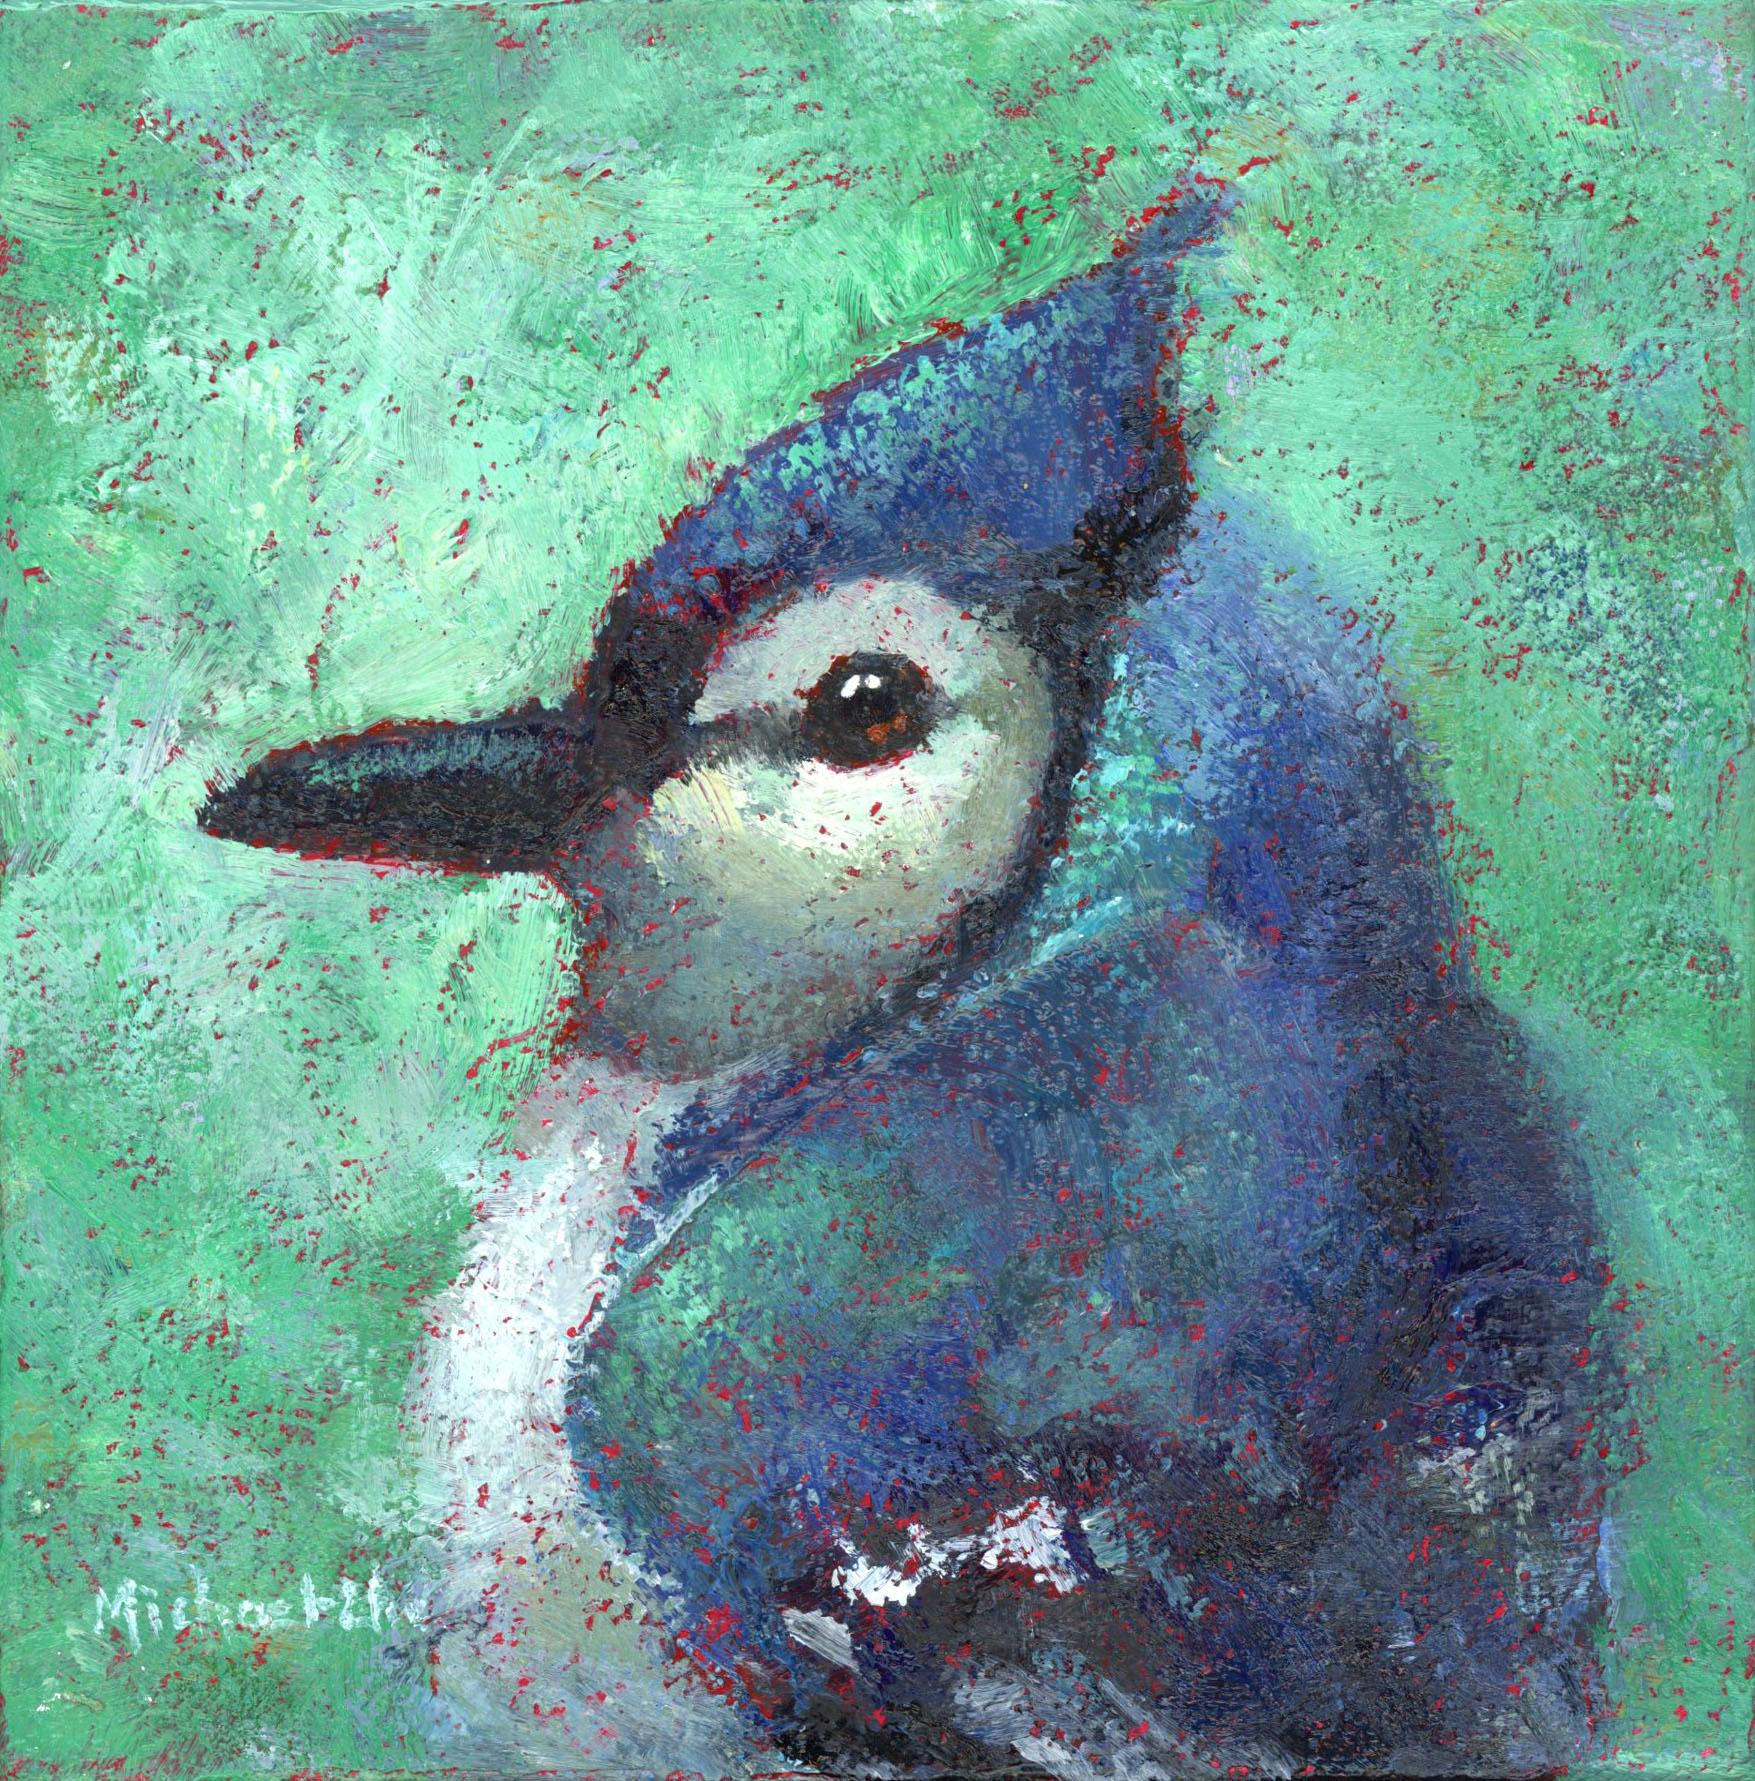 Michael-Che Swisher Animal Painting - "Scavenger Hunt" Oil Painting of a blue jay against a turquoise background